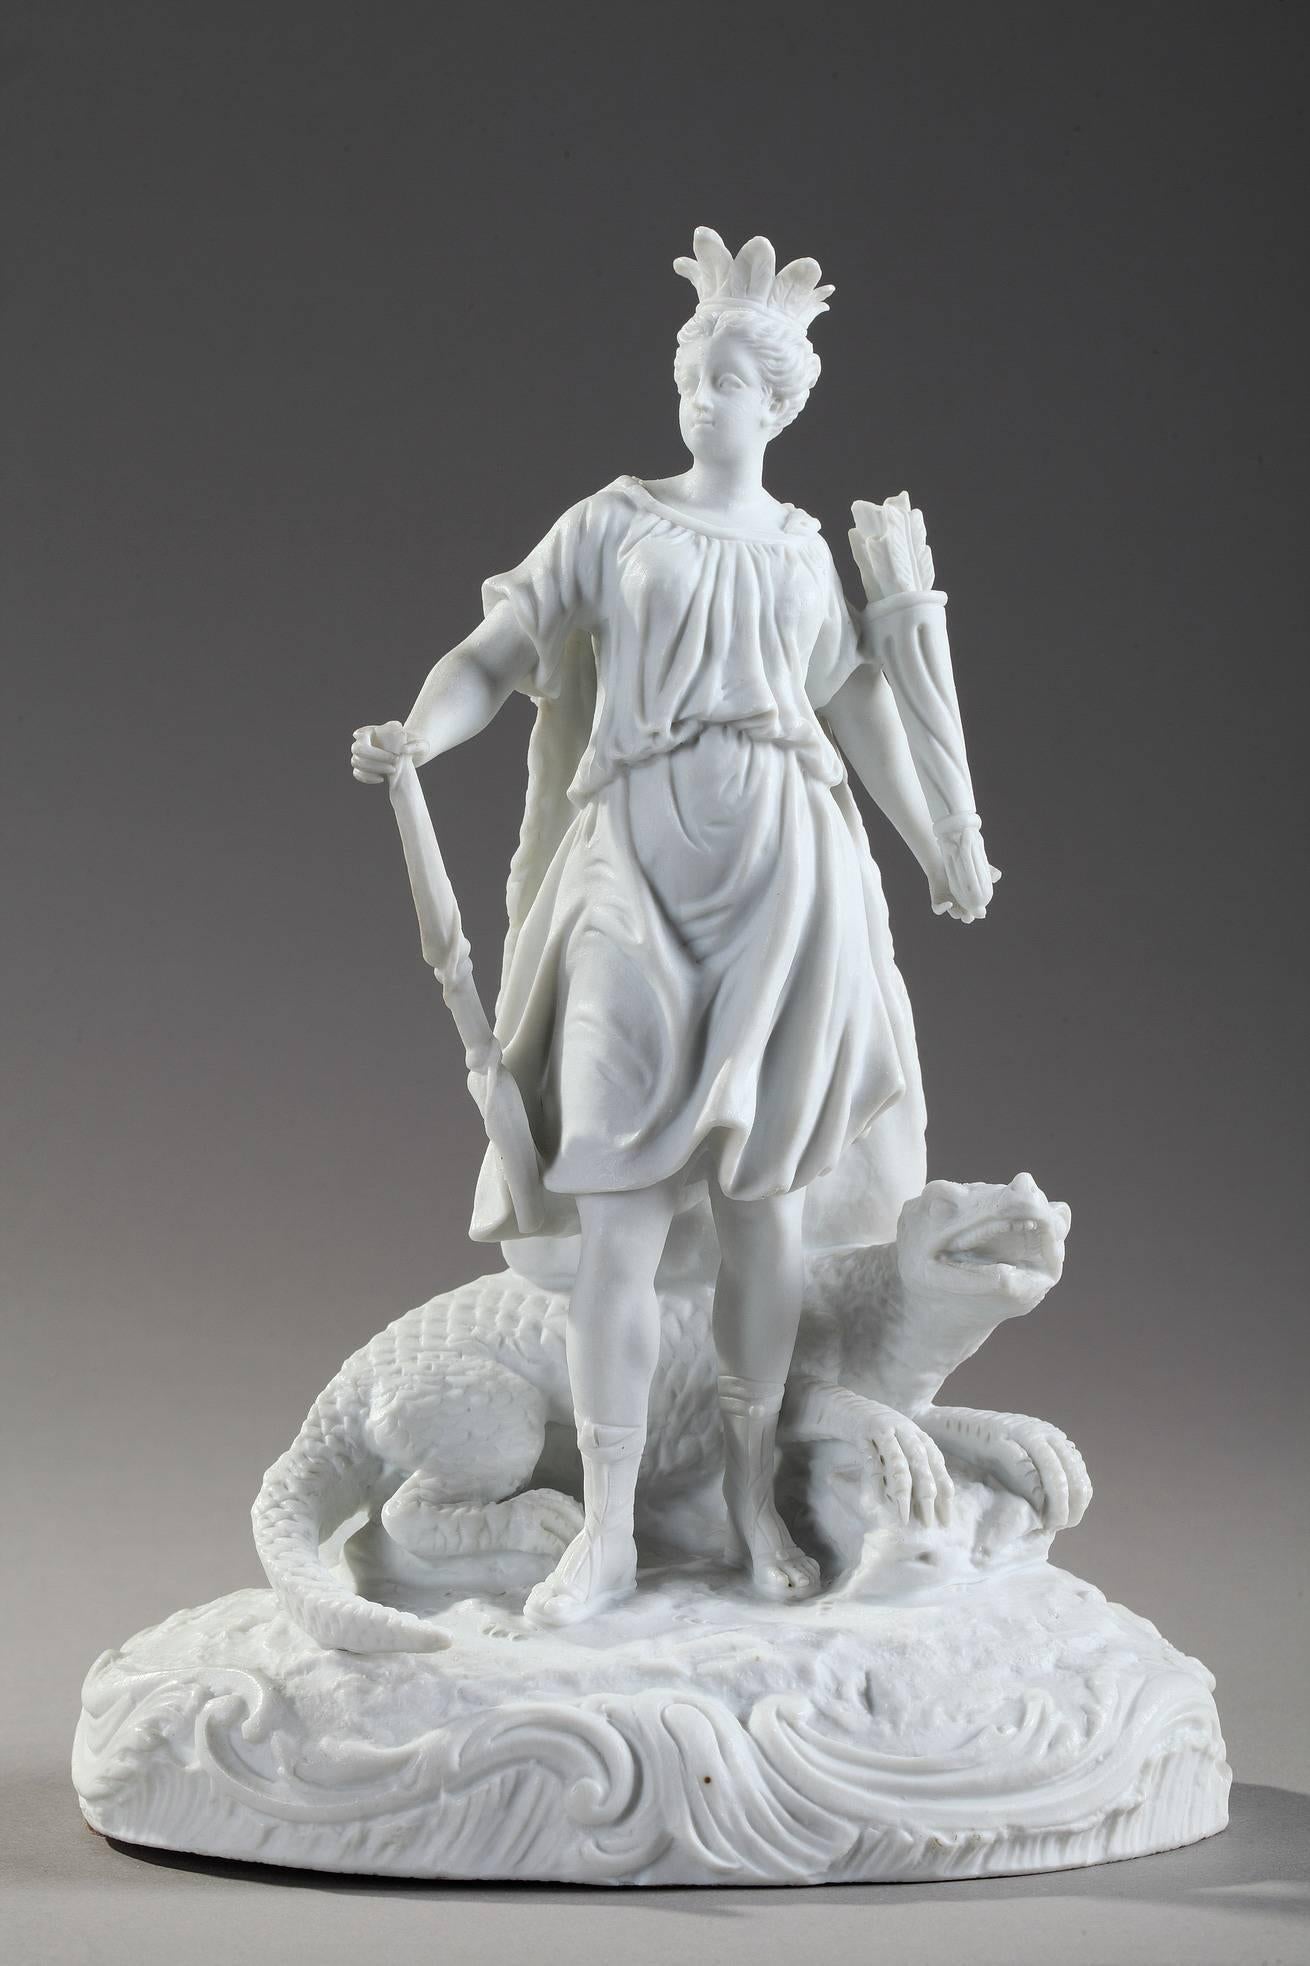 Mid-19th century biscuit statues depicting the four Continents. Each figure is posed with a representative animal : a lion (Africa), a camel (Asia), an alligator (the Americas), and a horse (Europe). These allegorical figures represent the